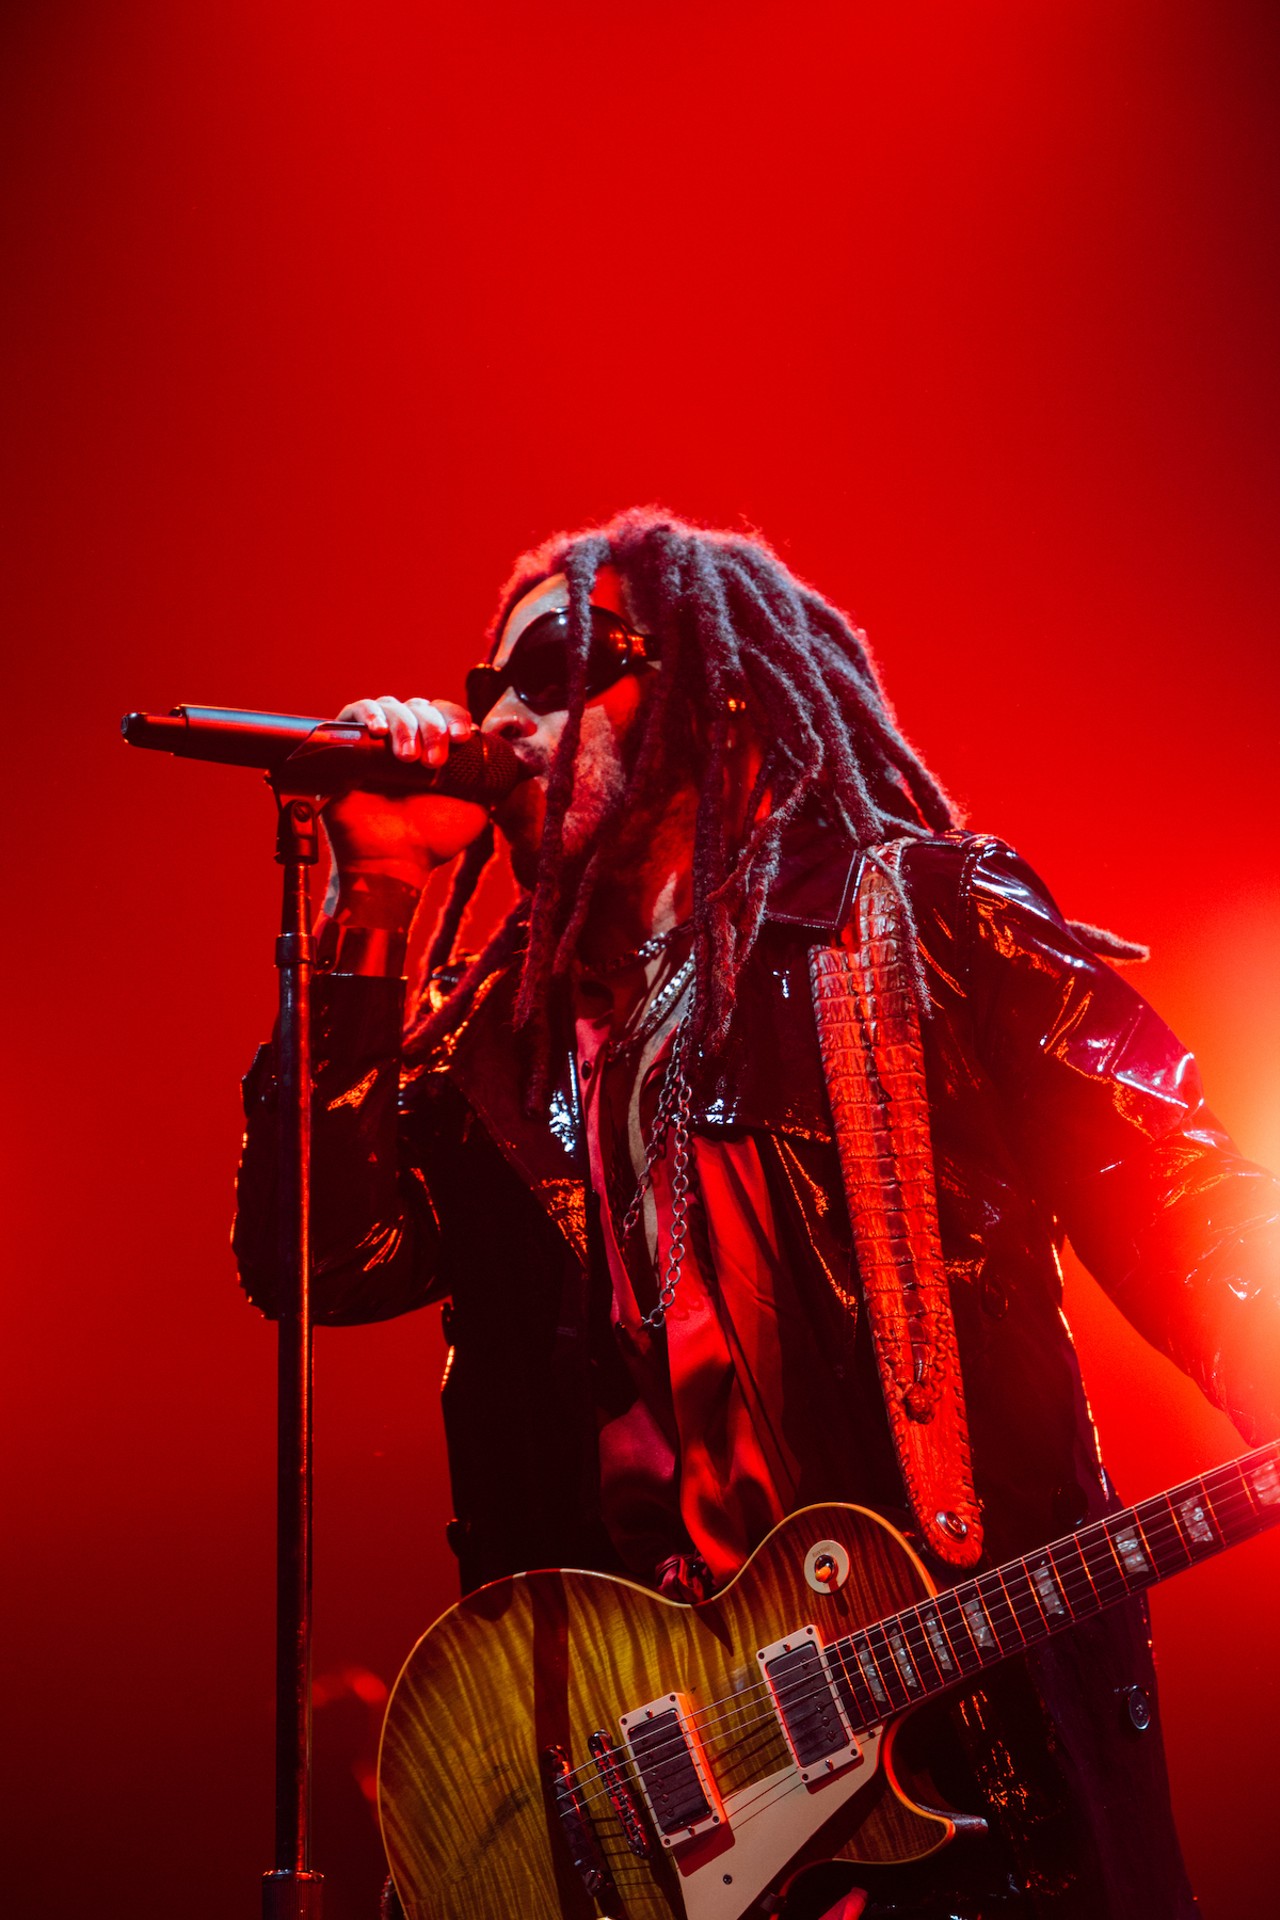 Lenny Kravitz plays Amalie Arena in Tampa, Florida on Oct. 21, 2022.